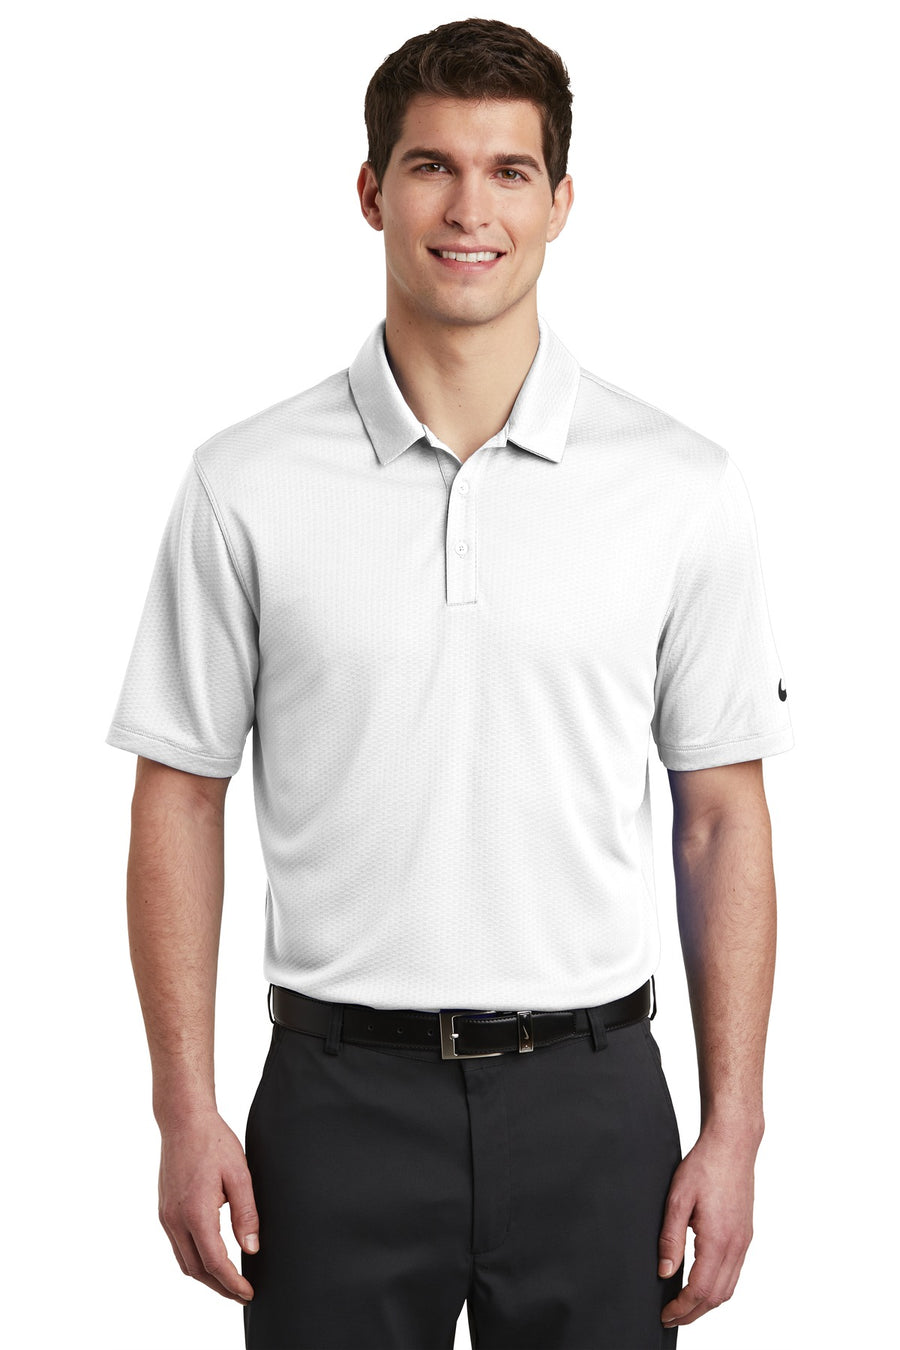 Nike Dri-FIT Hex Textured Polo.